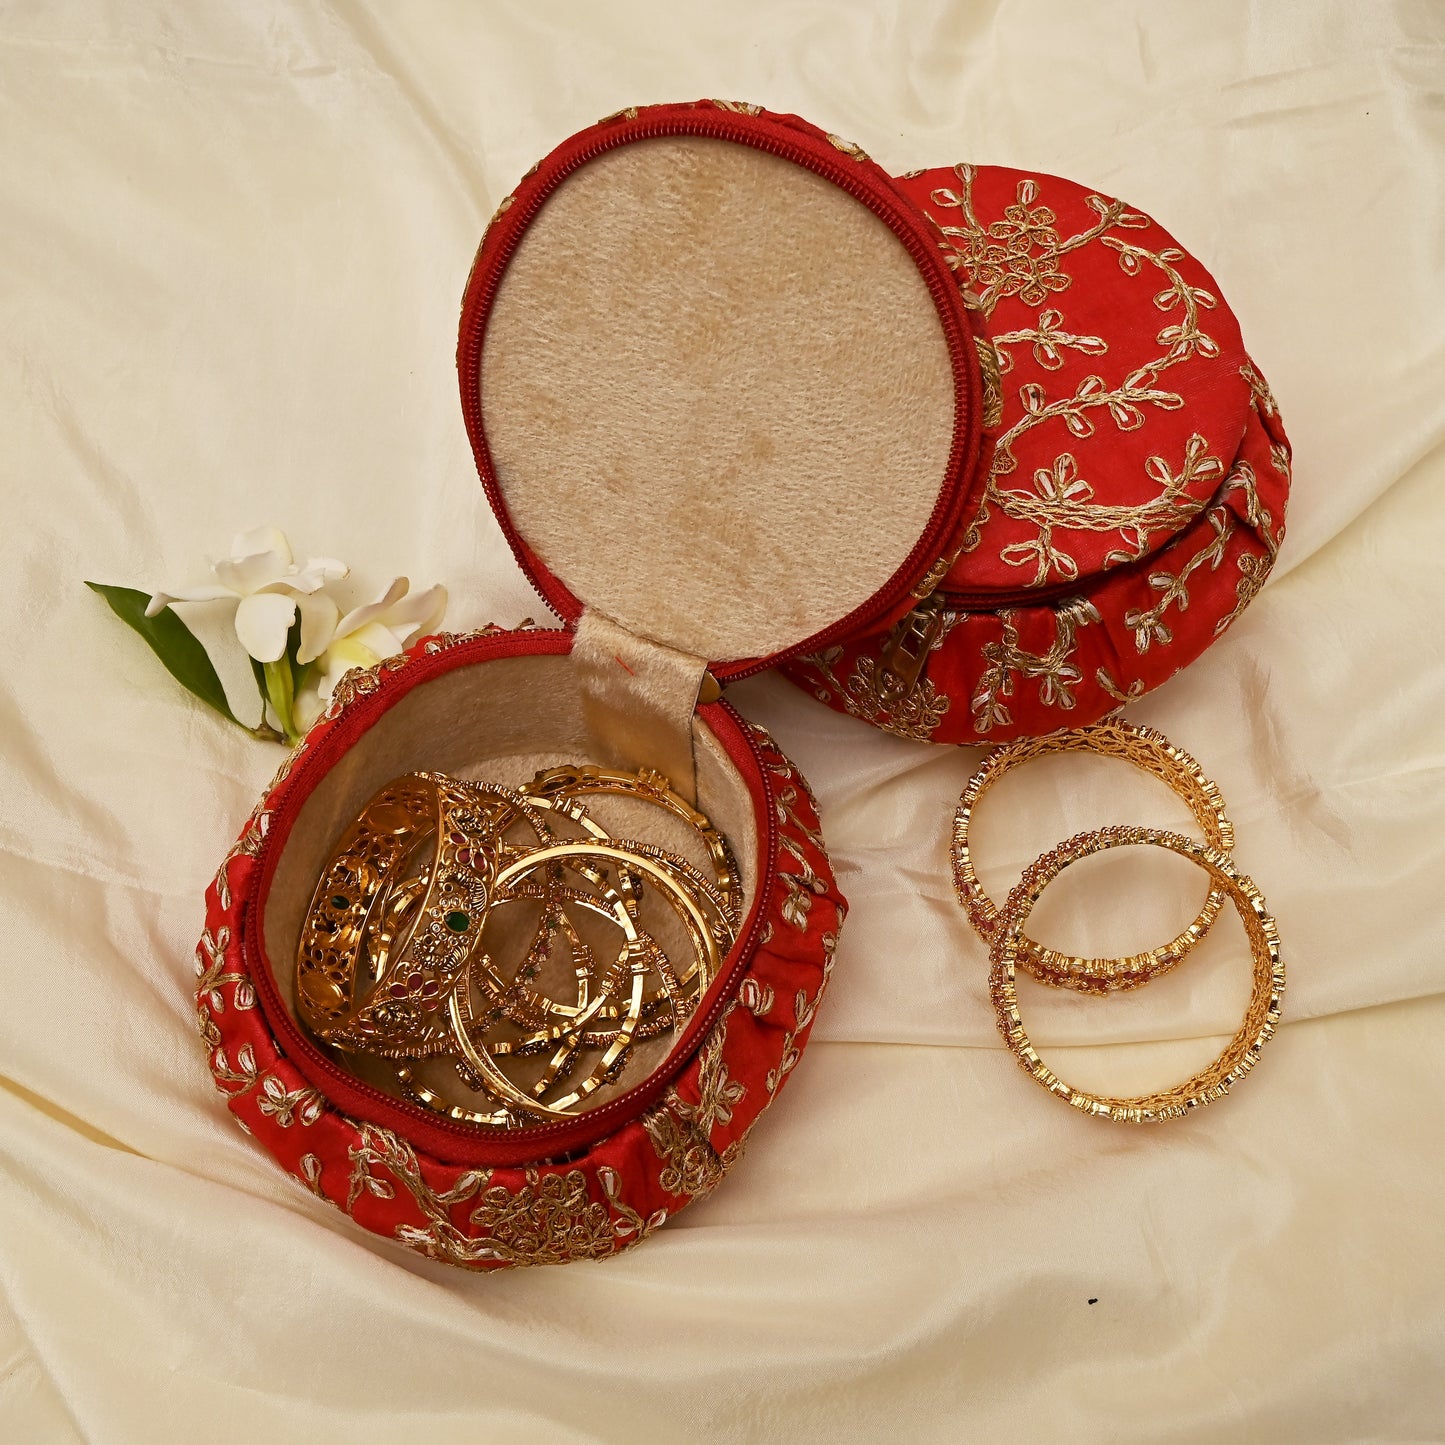 Exquisite Embroidered Silk Fabric Big Matki Bangle Box - The Perfect Return Gift For All Ages - Red